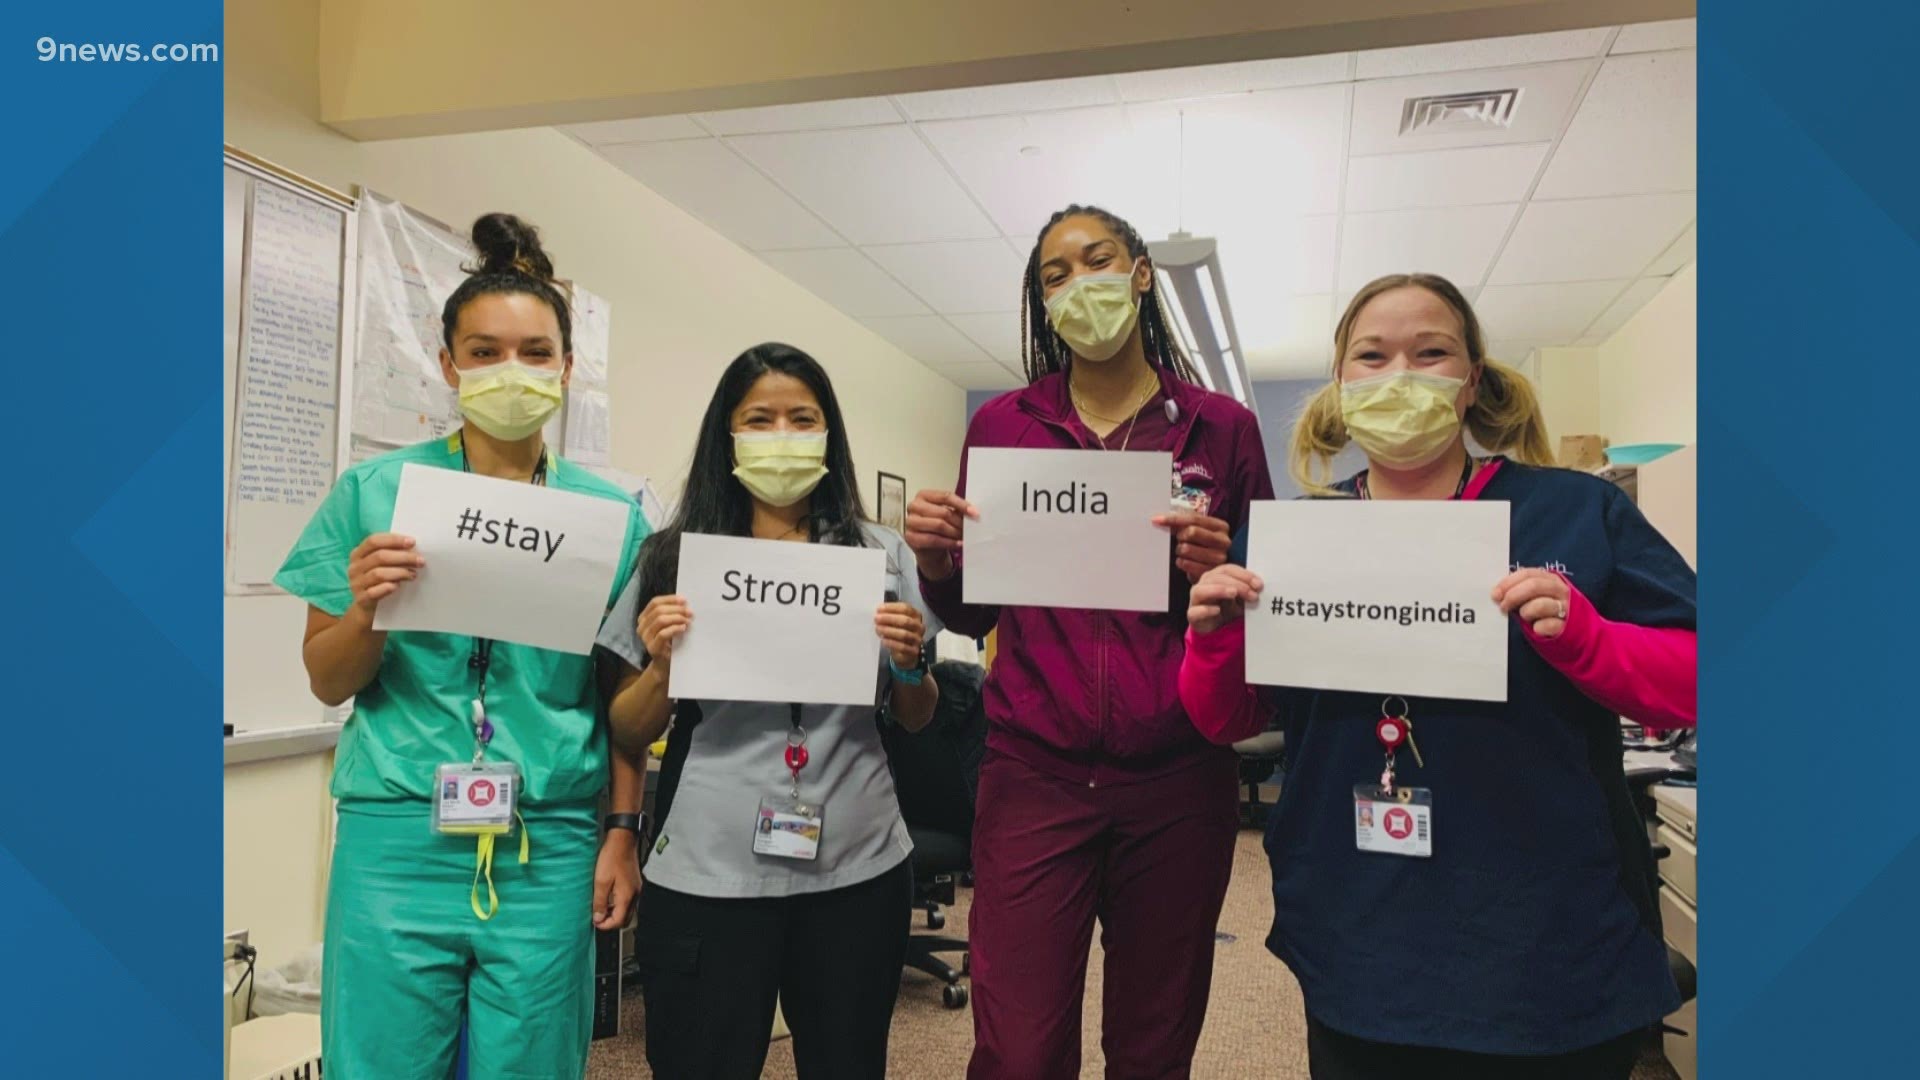 A doctor at UCHealth helped donate PPE to doctors in India battling a surge of COVID-19 cases.